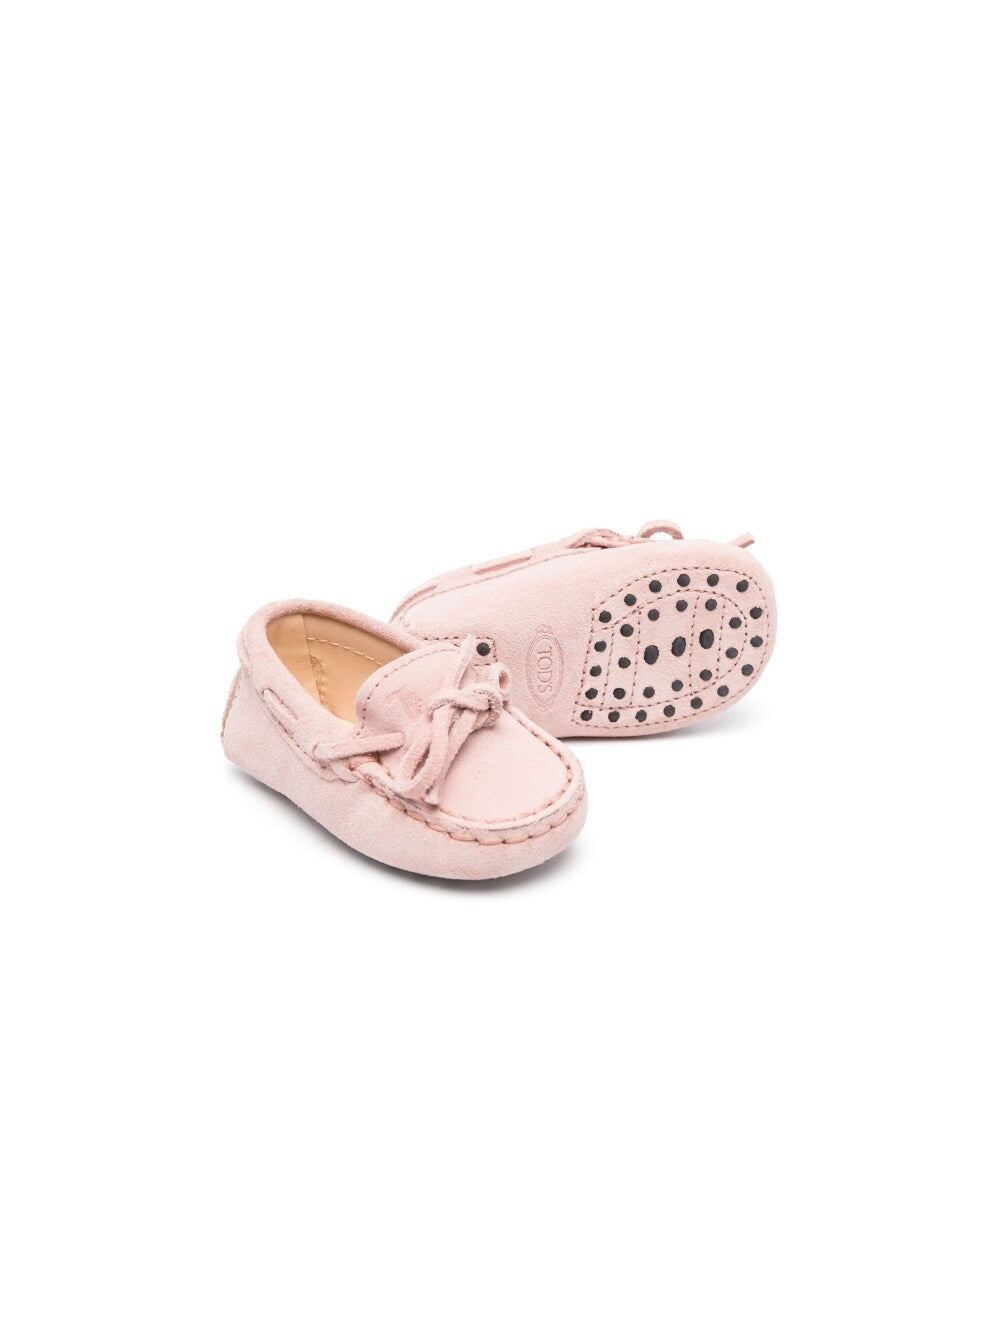 Pink moccasin for newborn